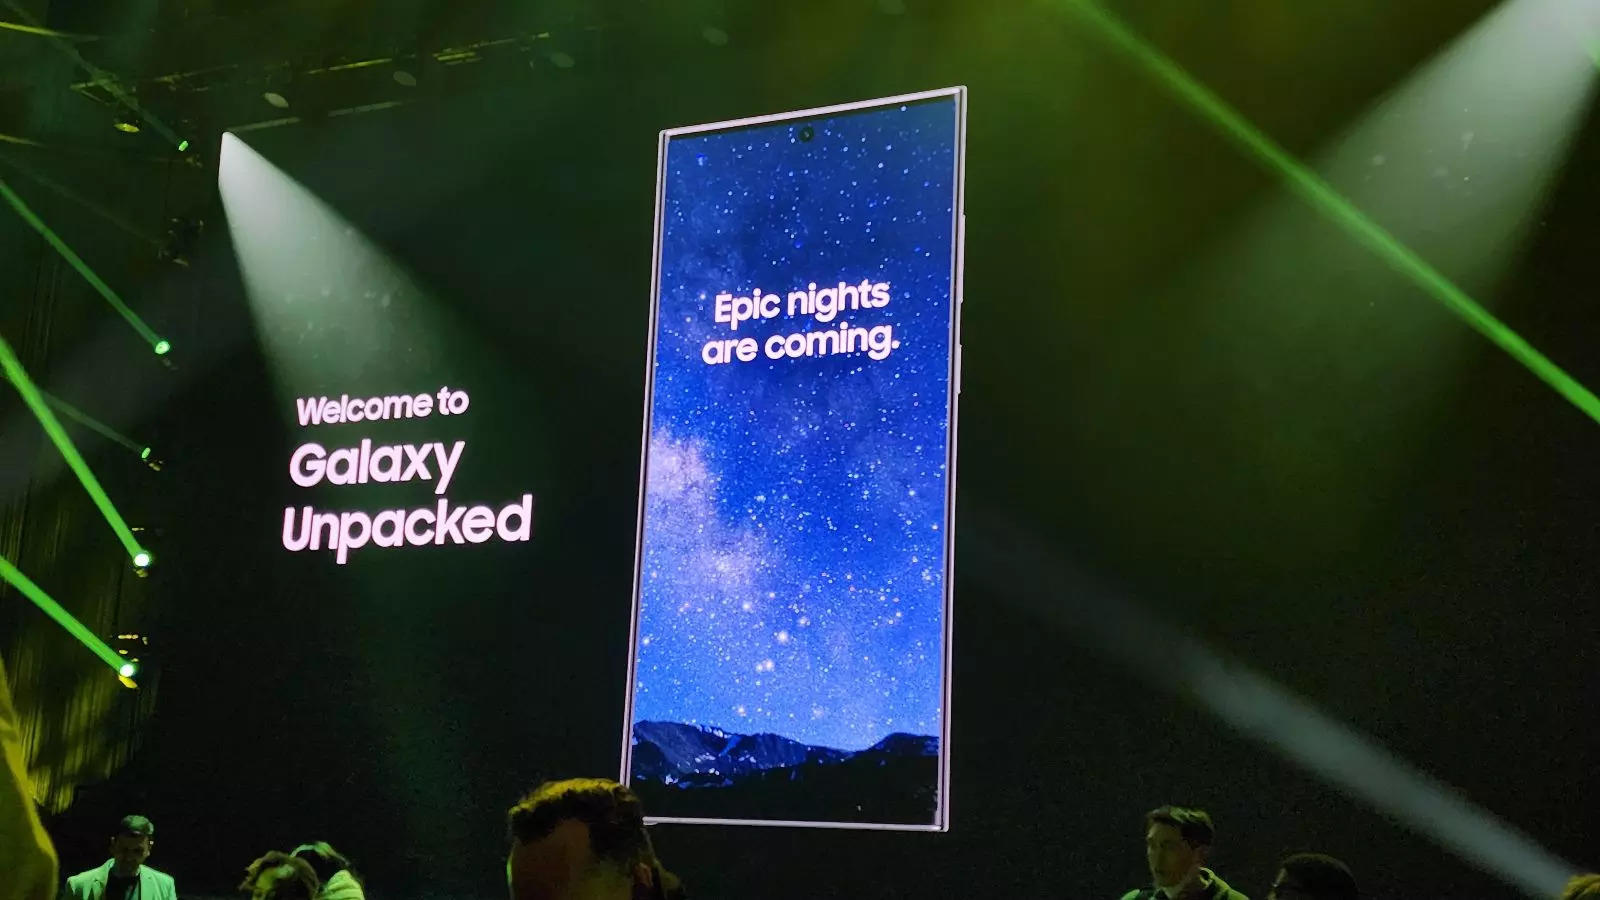 Samsung Unpacked recap: Every Galaxy product that was announced